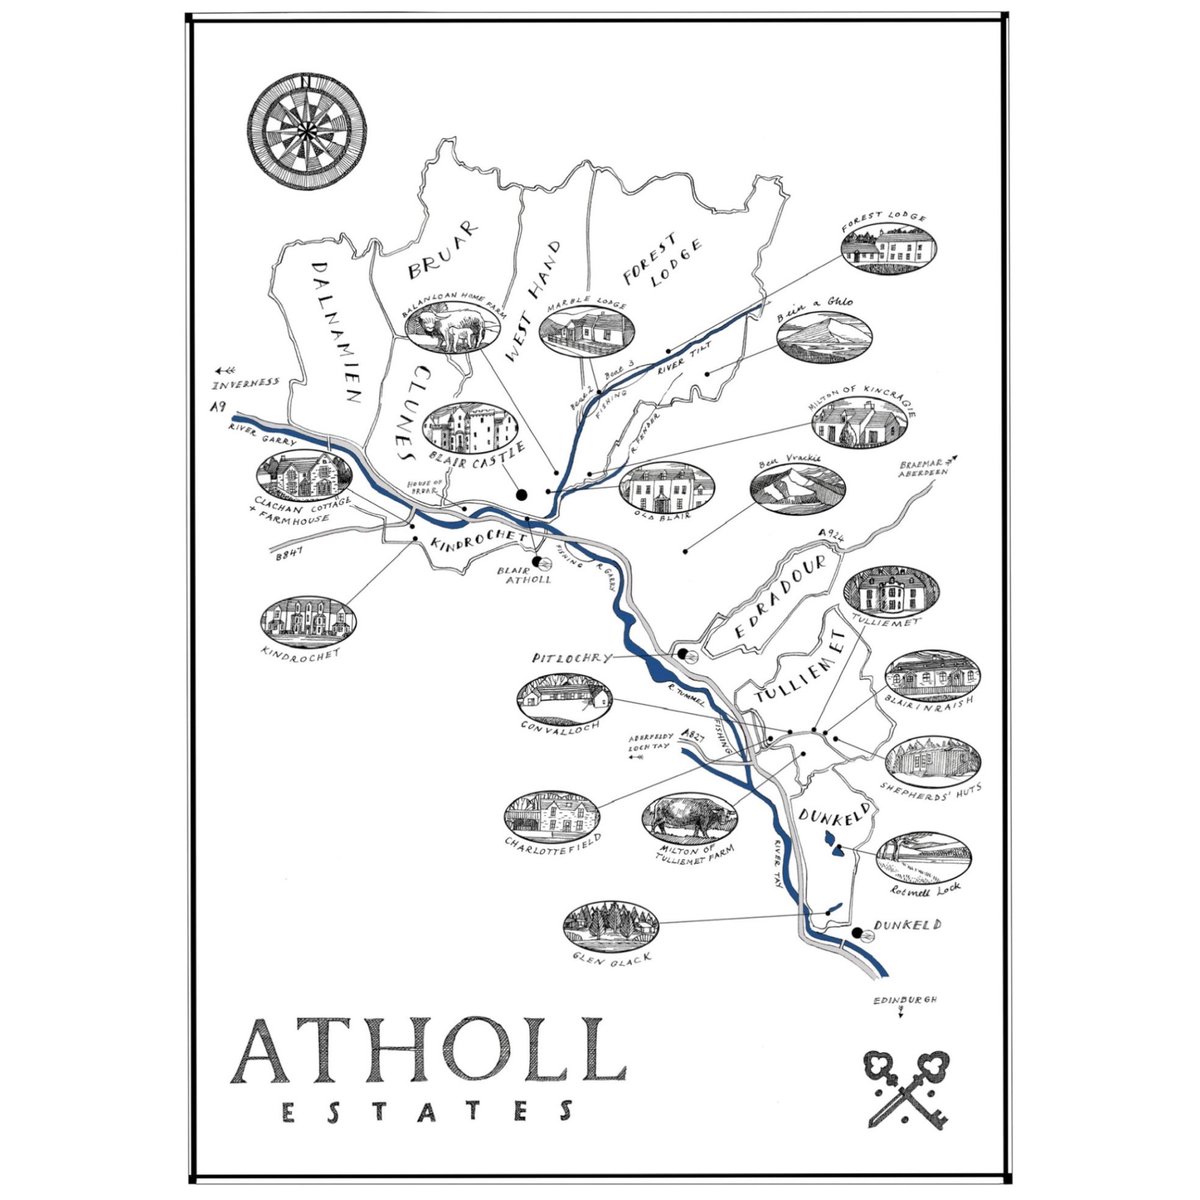 A new post about using space and simplicity to map the Atholl Estate in the highlands. #stayonatholl #illustration #handdrawnmaps helencannillustration.wordpress.com/2023/08/16/map…